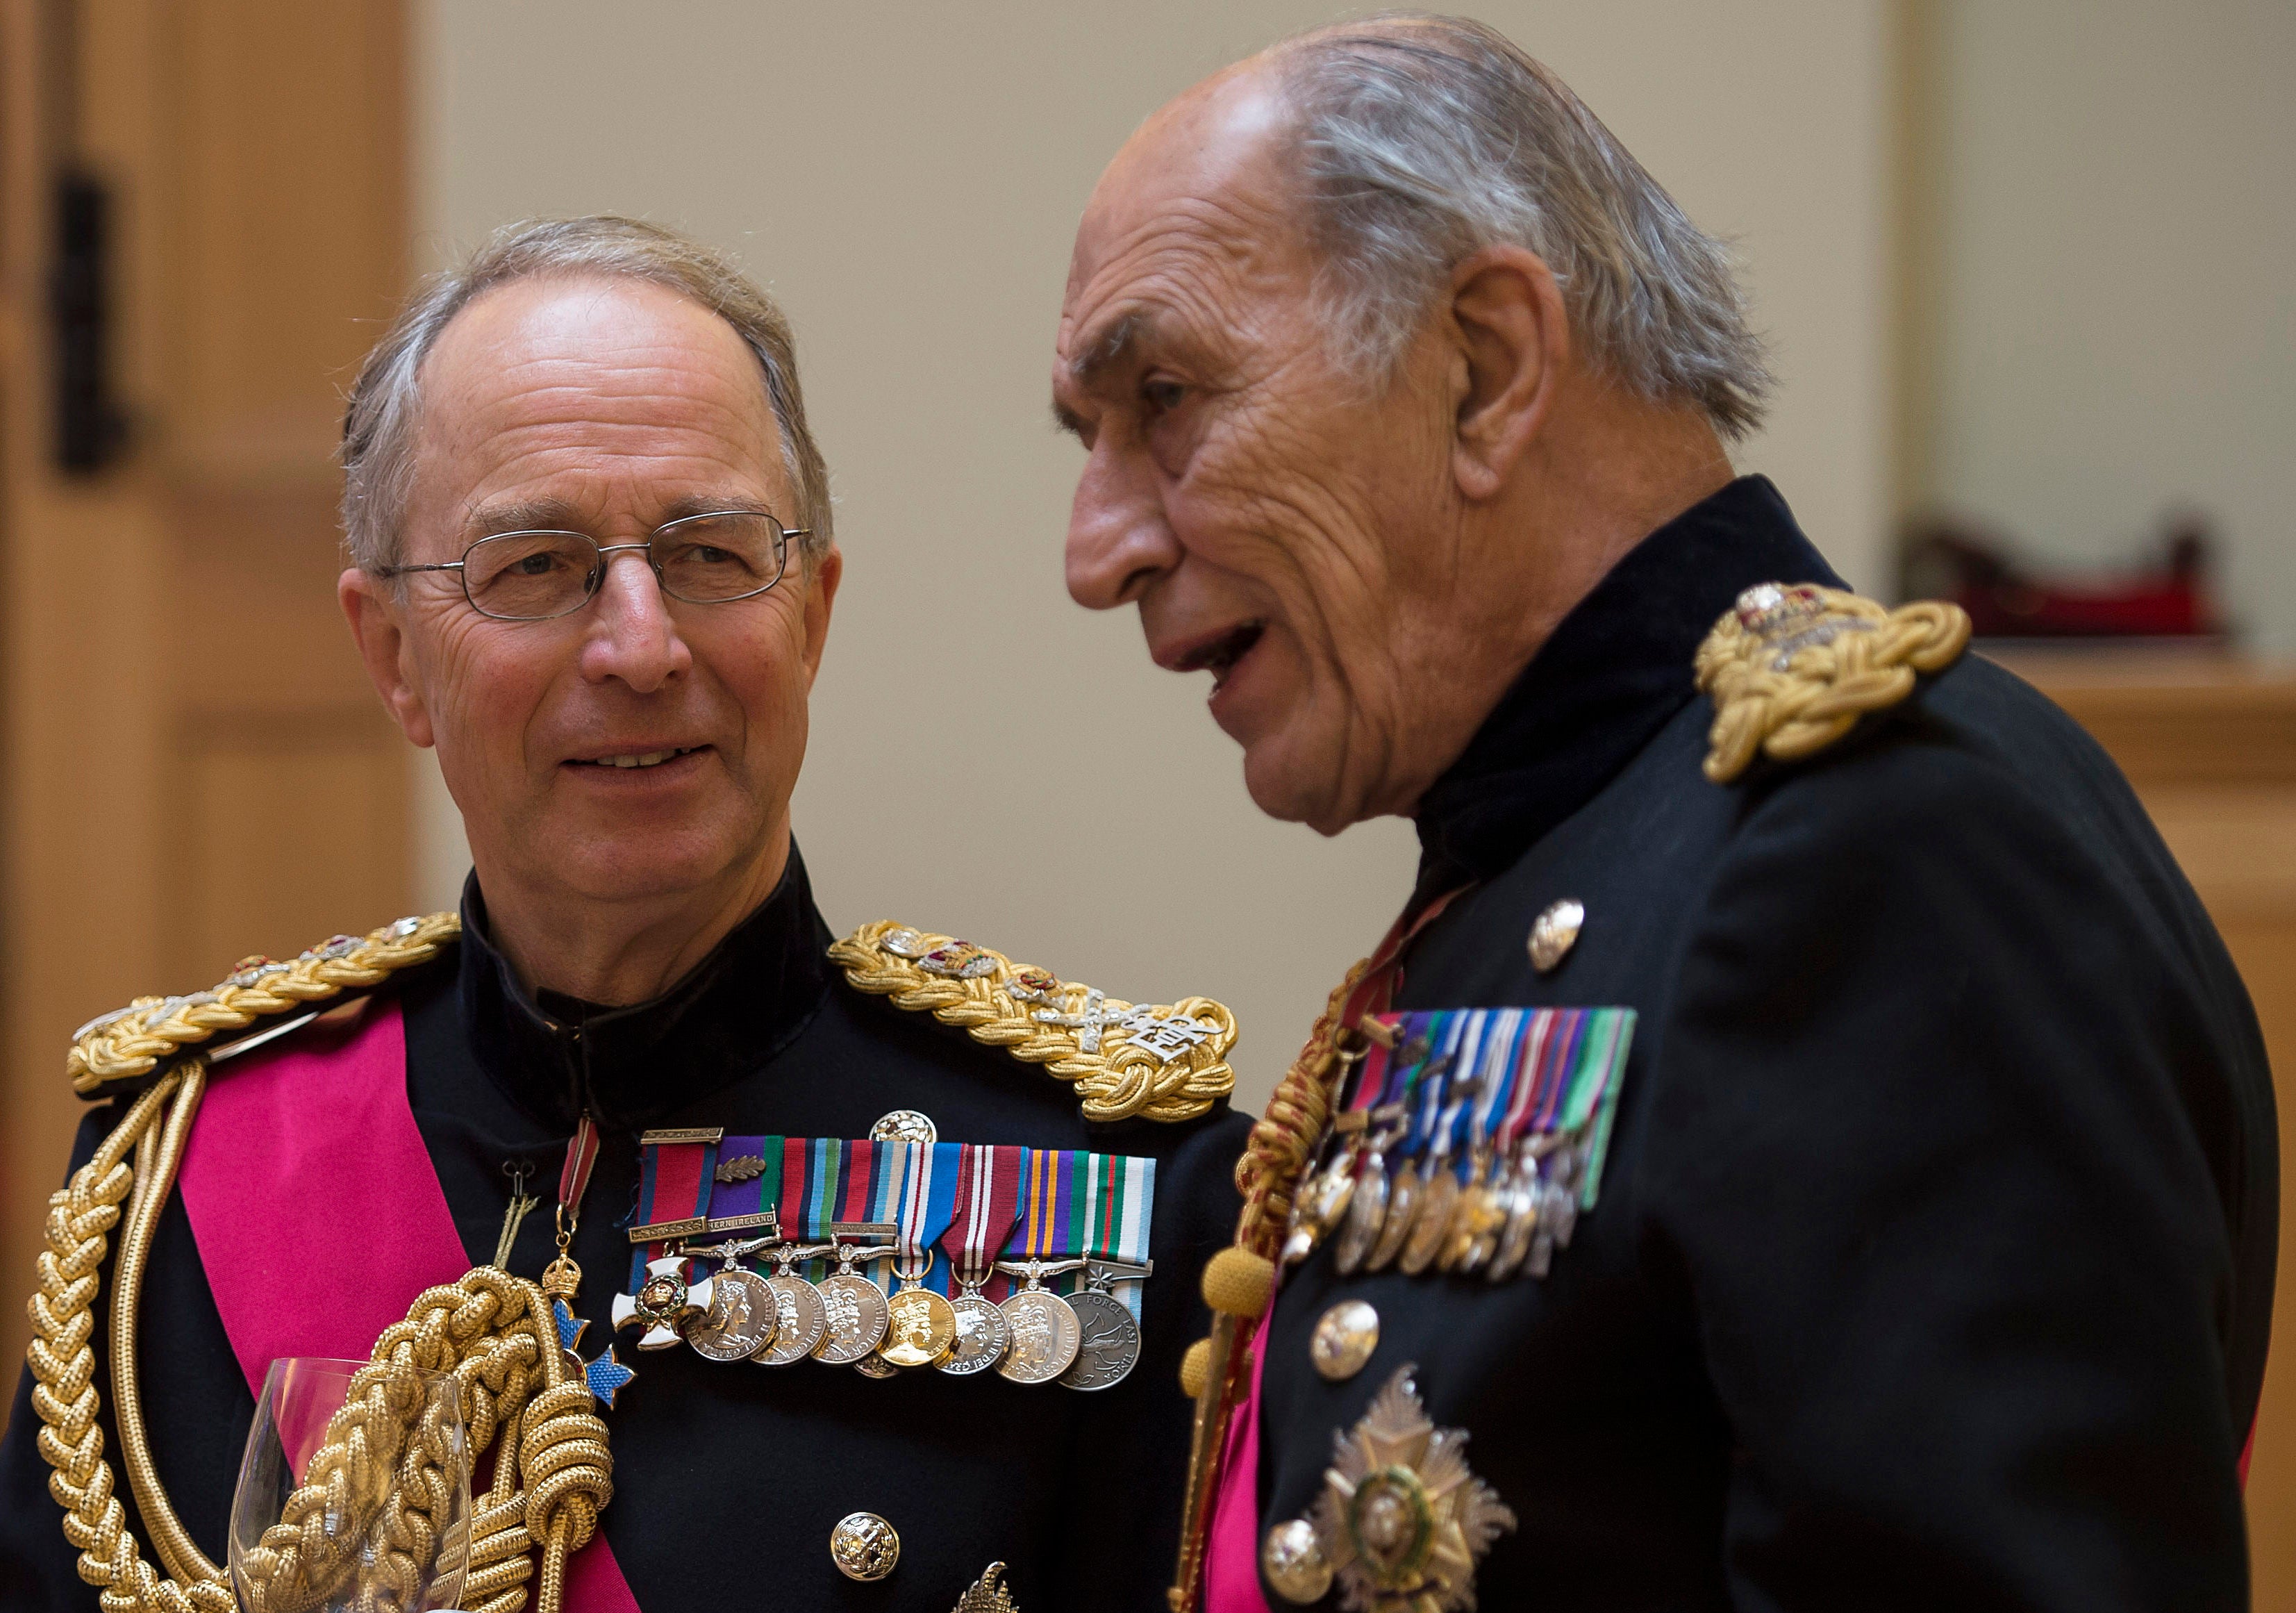 Former Chief of Defence Staff General Sir David Richards (left) speaks with General Sir Michael Jackson at a reception at the Honourable Artillery Company in London